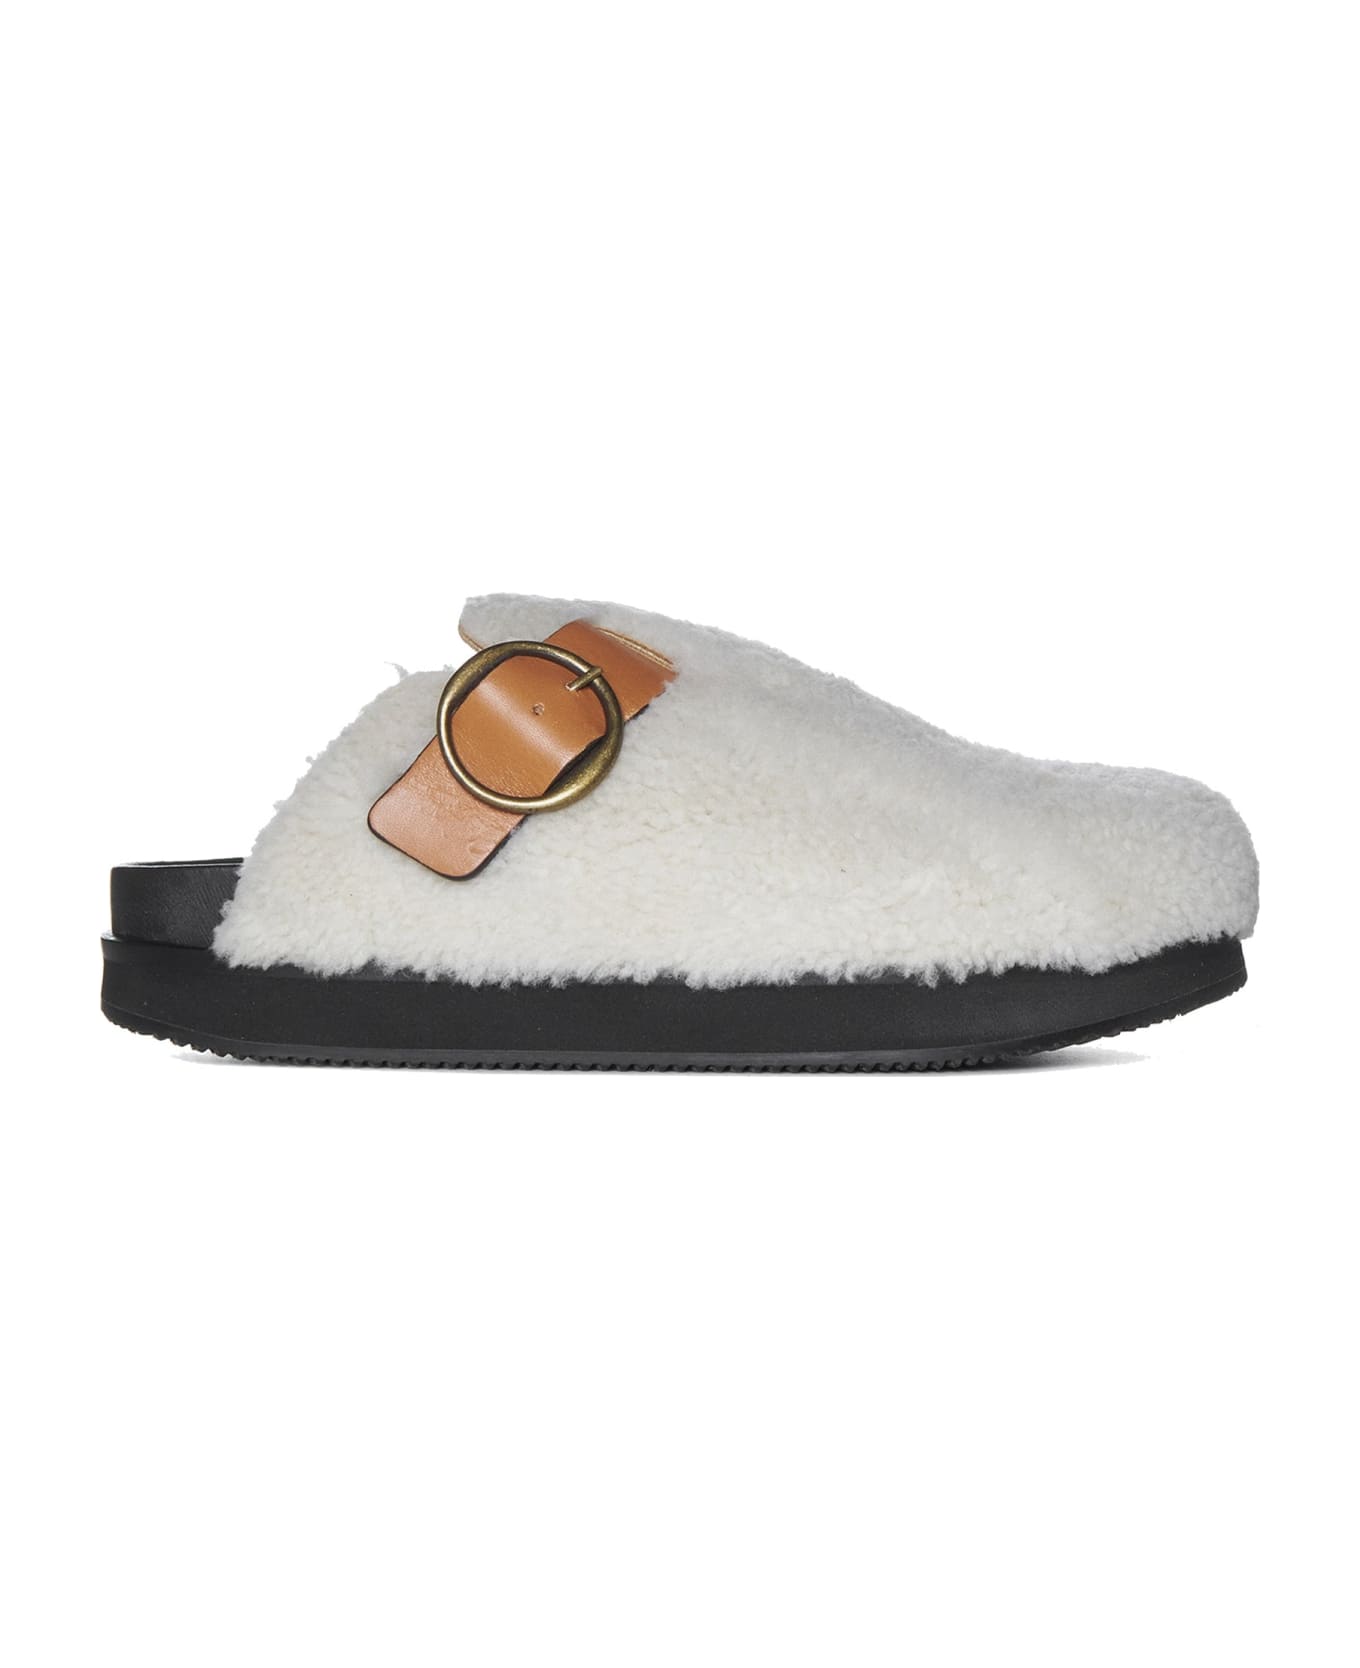 Isabel Marant Mirst Shearling Mules - Beige